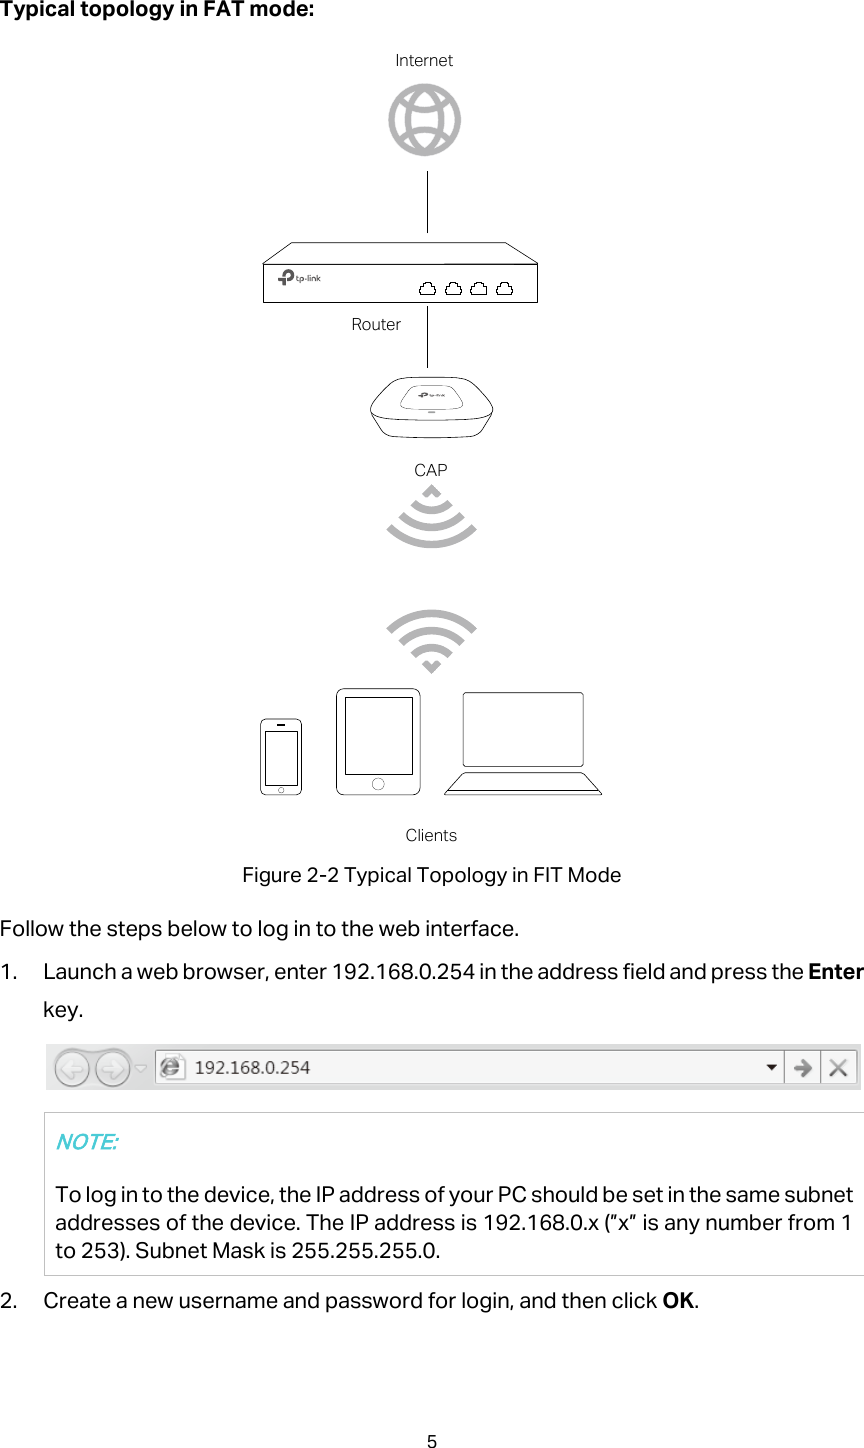 Typical topology in FAT mode:  Figure 2-2 Typical Topology in FIT Mode Follow the steps below to log in to the web interface. 1. Launch a web browser, enter 192.168.0.254 in the address field and press the Enter key.  NOTE: To log in to the device, the IP address of your PC should be set in the same subnet addresses of the device. The IP address is 192.168.0.x (”x” is any number from 1 to 253). Subnet Mask is 255.255.255.0. 2. Create a new username and password for login, and then click OK. CAPRouterInternetClients5  